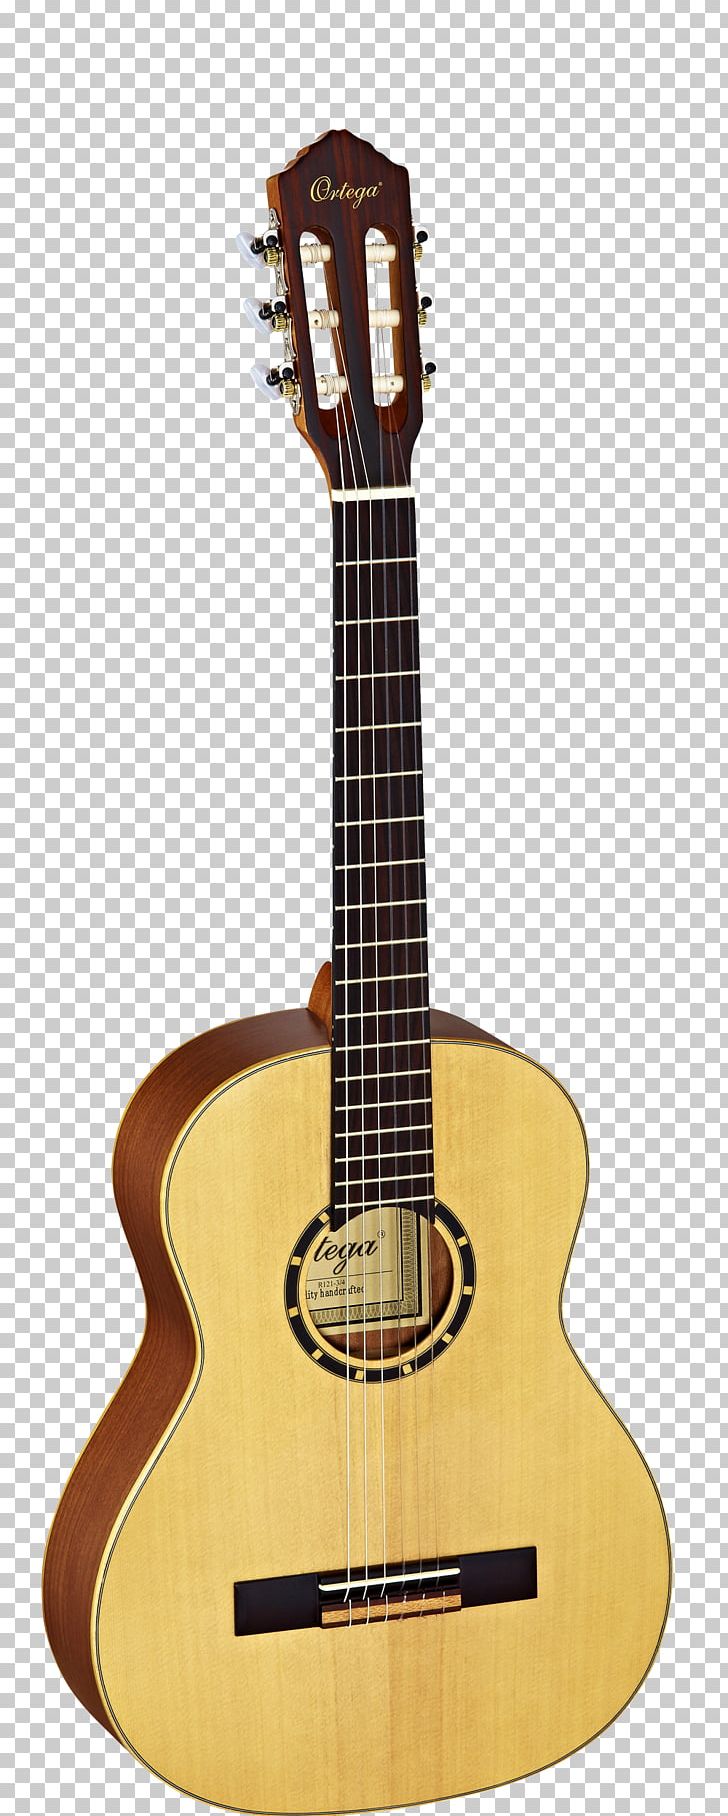 Classical Guitar Steel-string Acoustic Guitar Musical Instruments PNG, Clipart, Acoustic Electric Guitar, Amancio Ortega, Bridge, Classical Guitar, Cuatro Free PNG Download